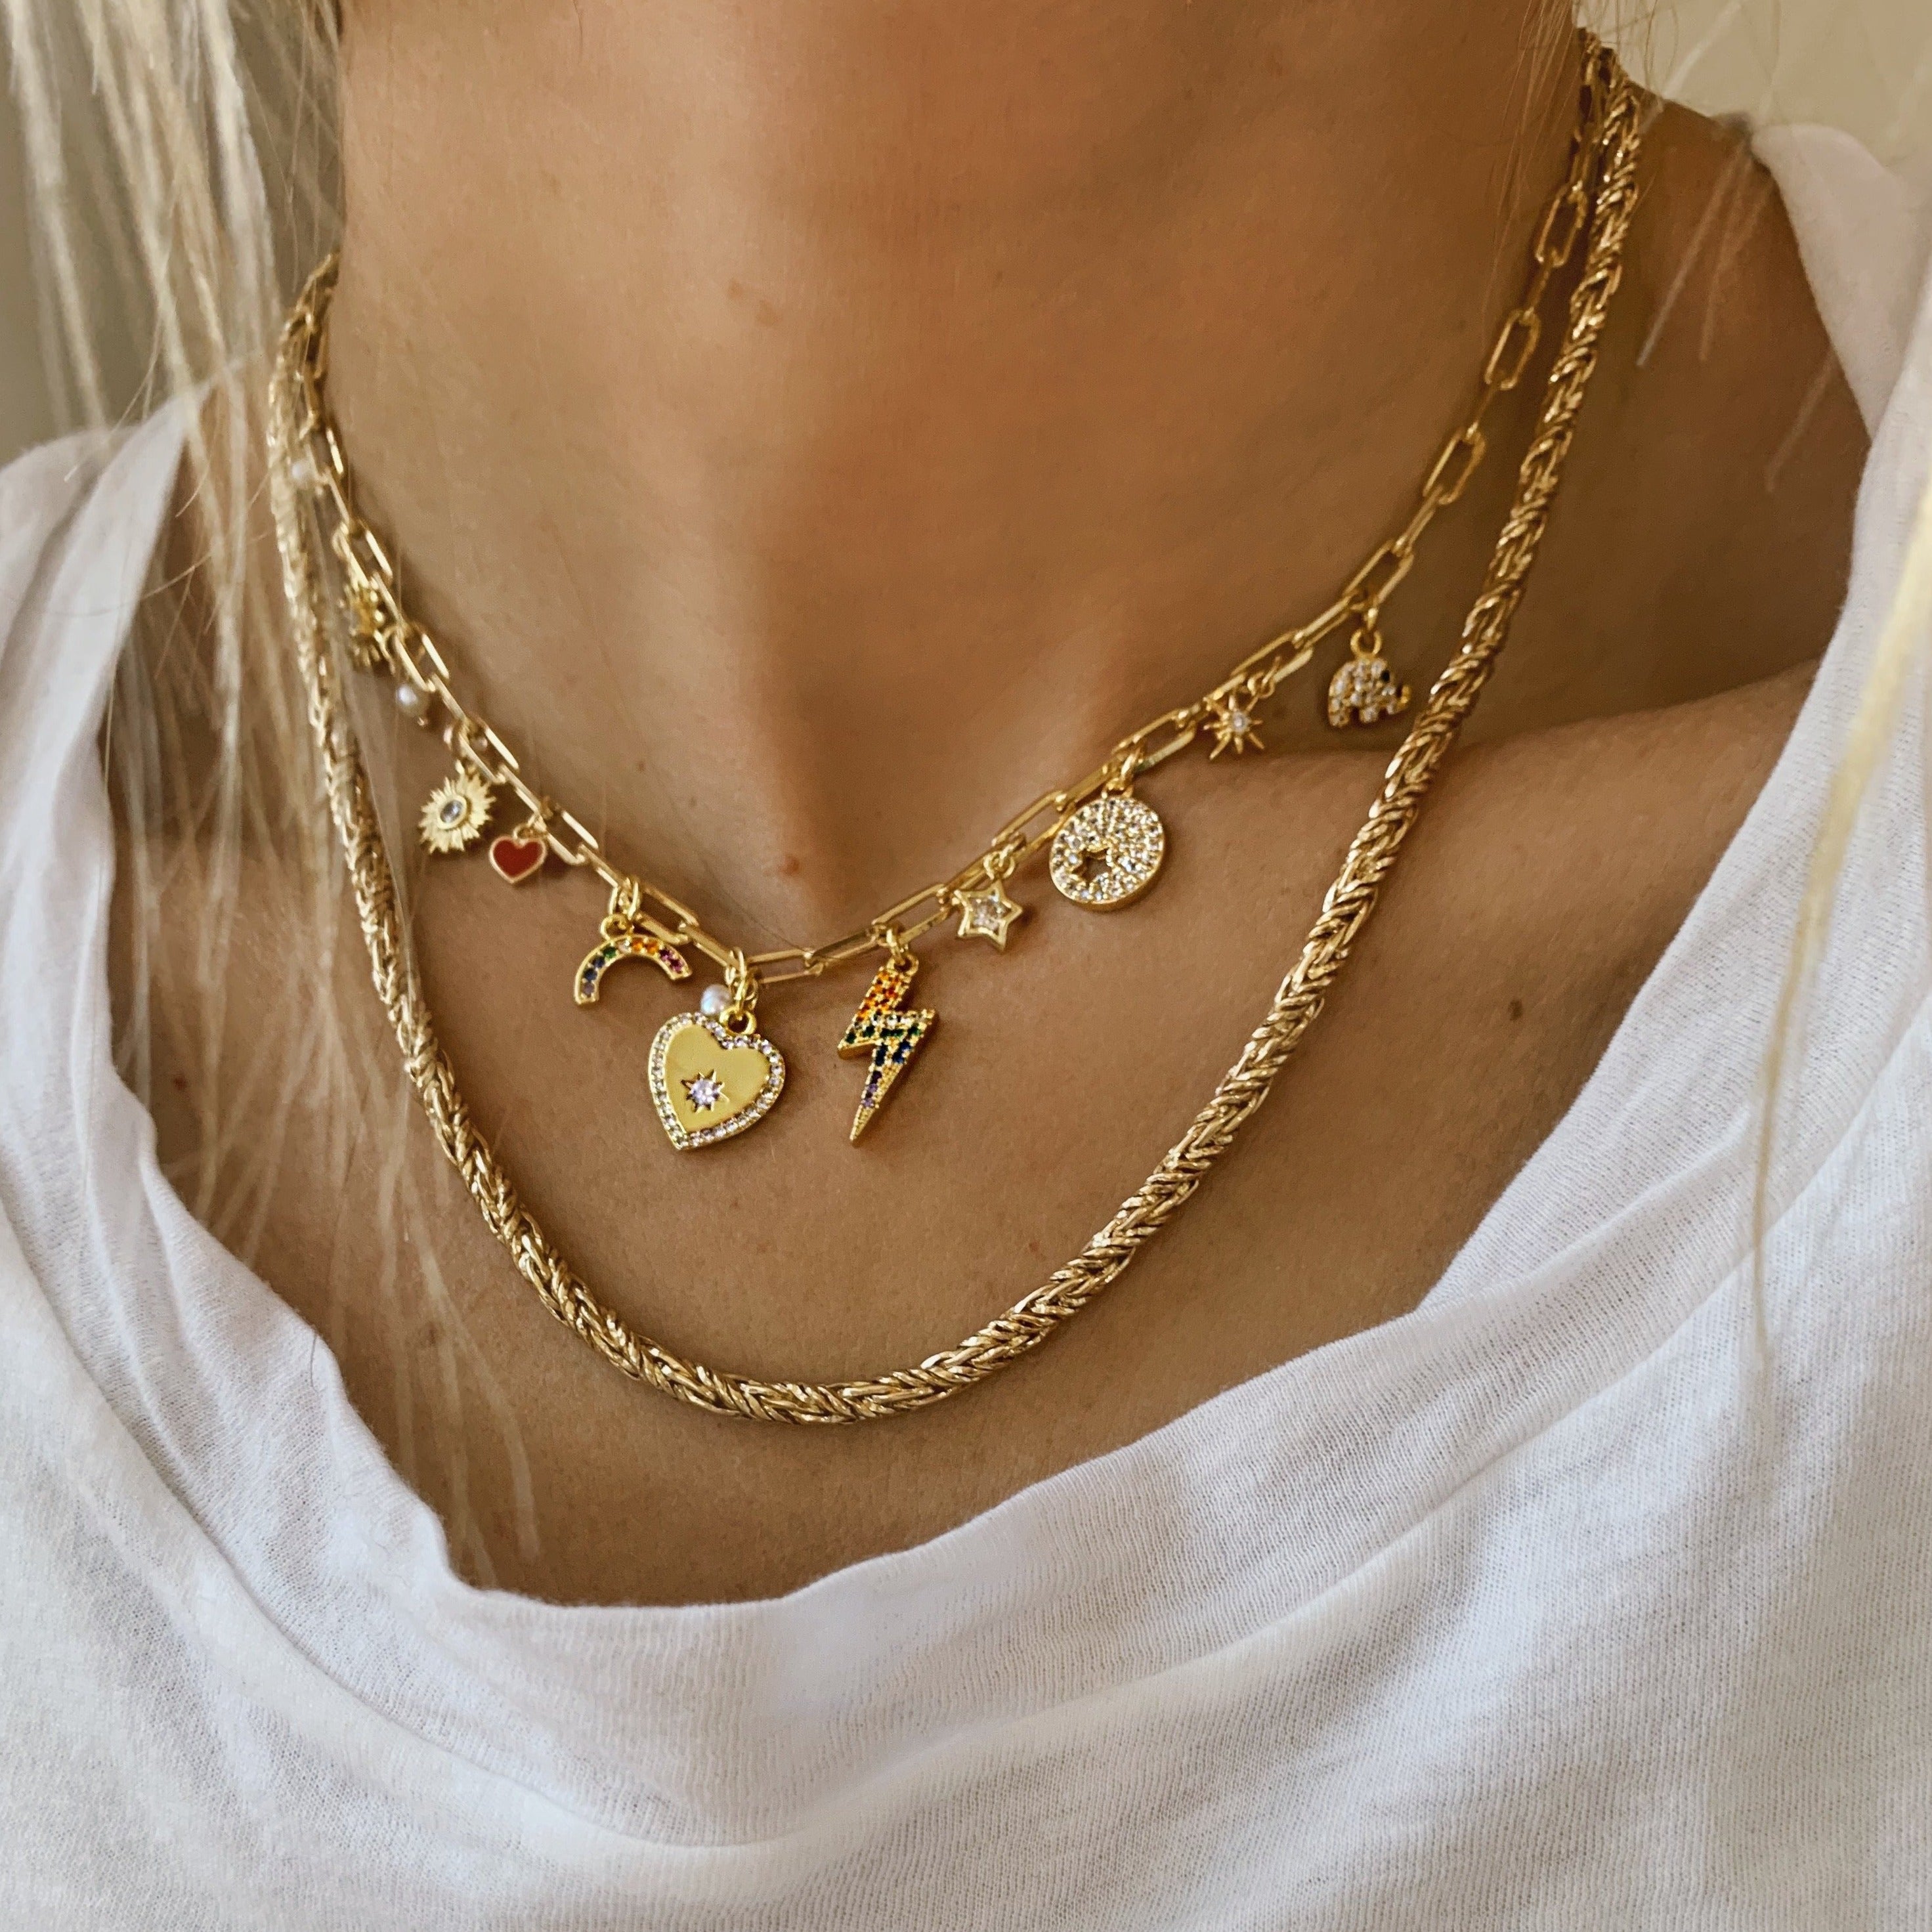 13 of the best charm necklaces to nail the Y2K jewellery trend